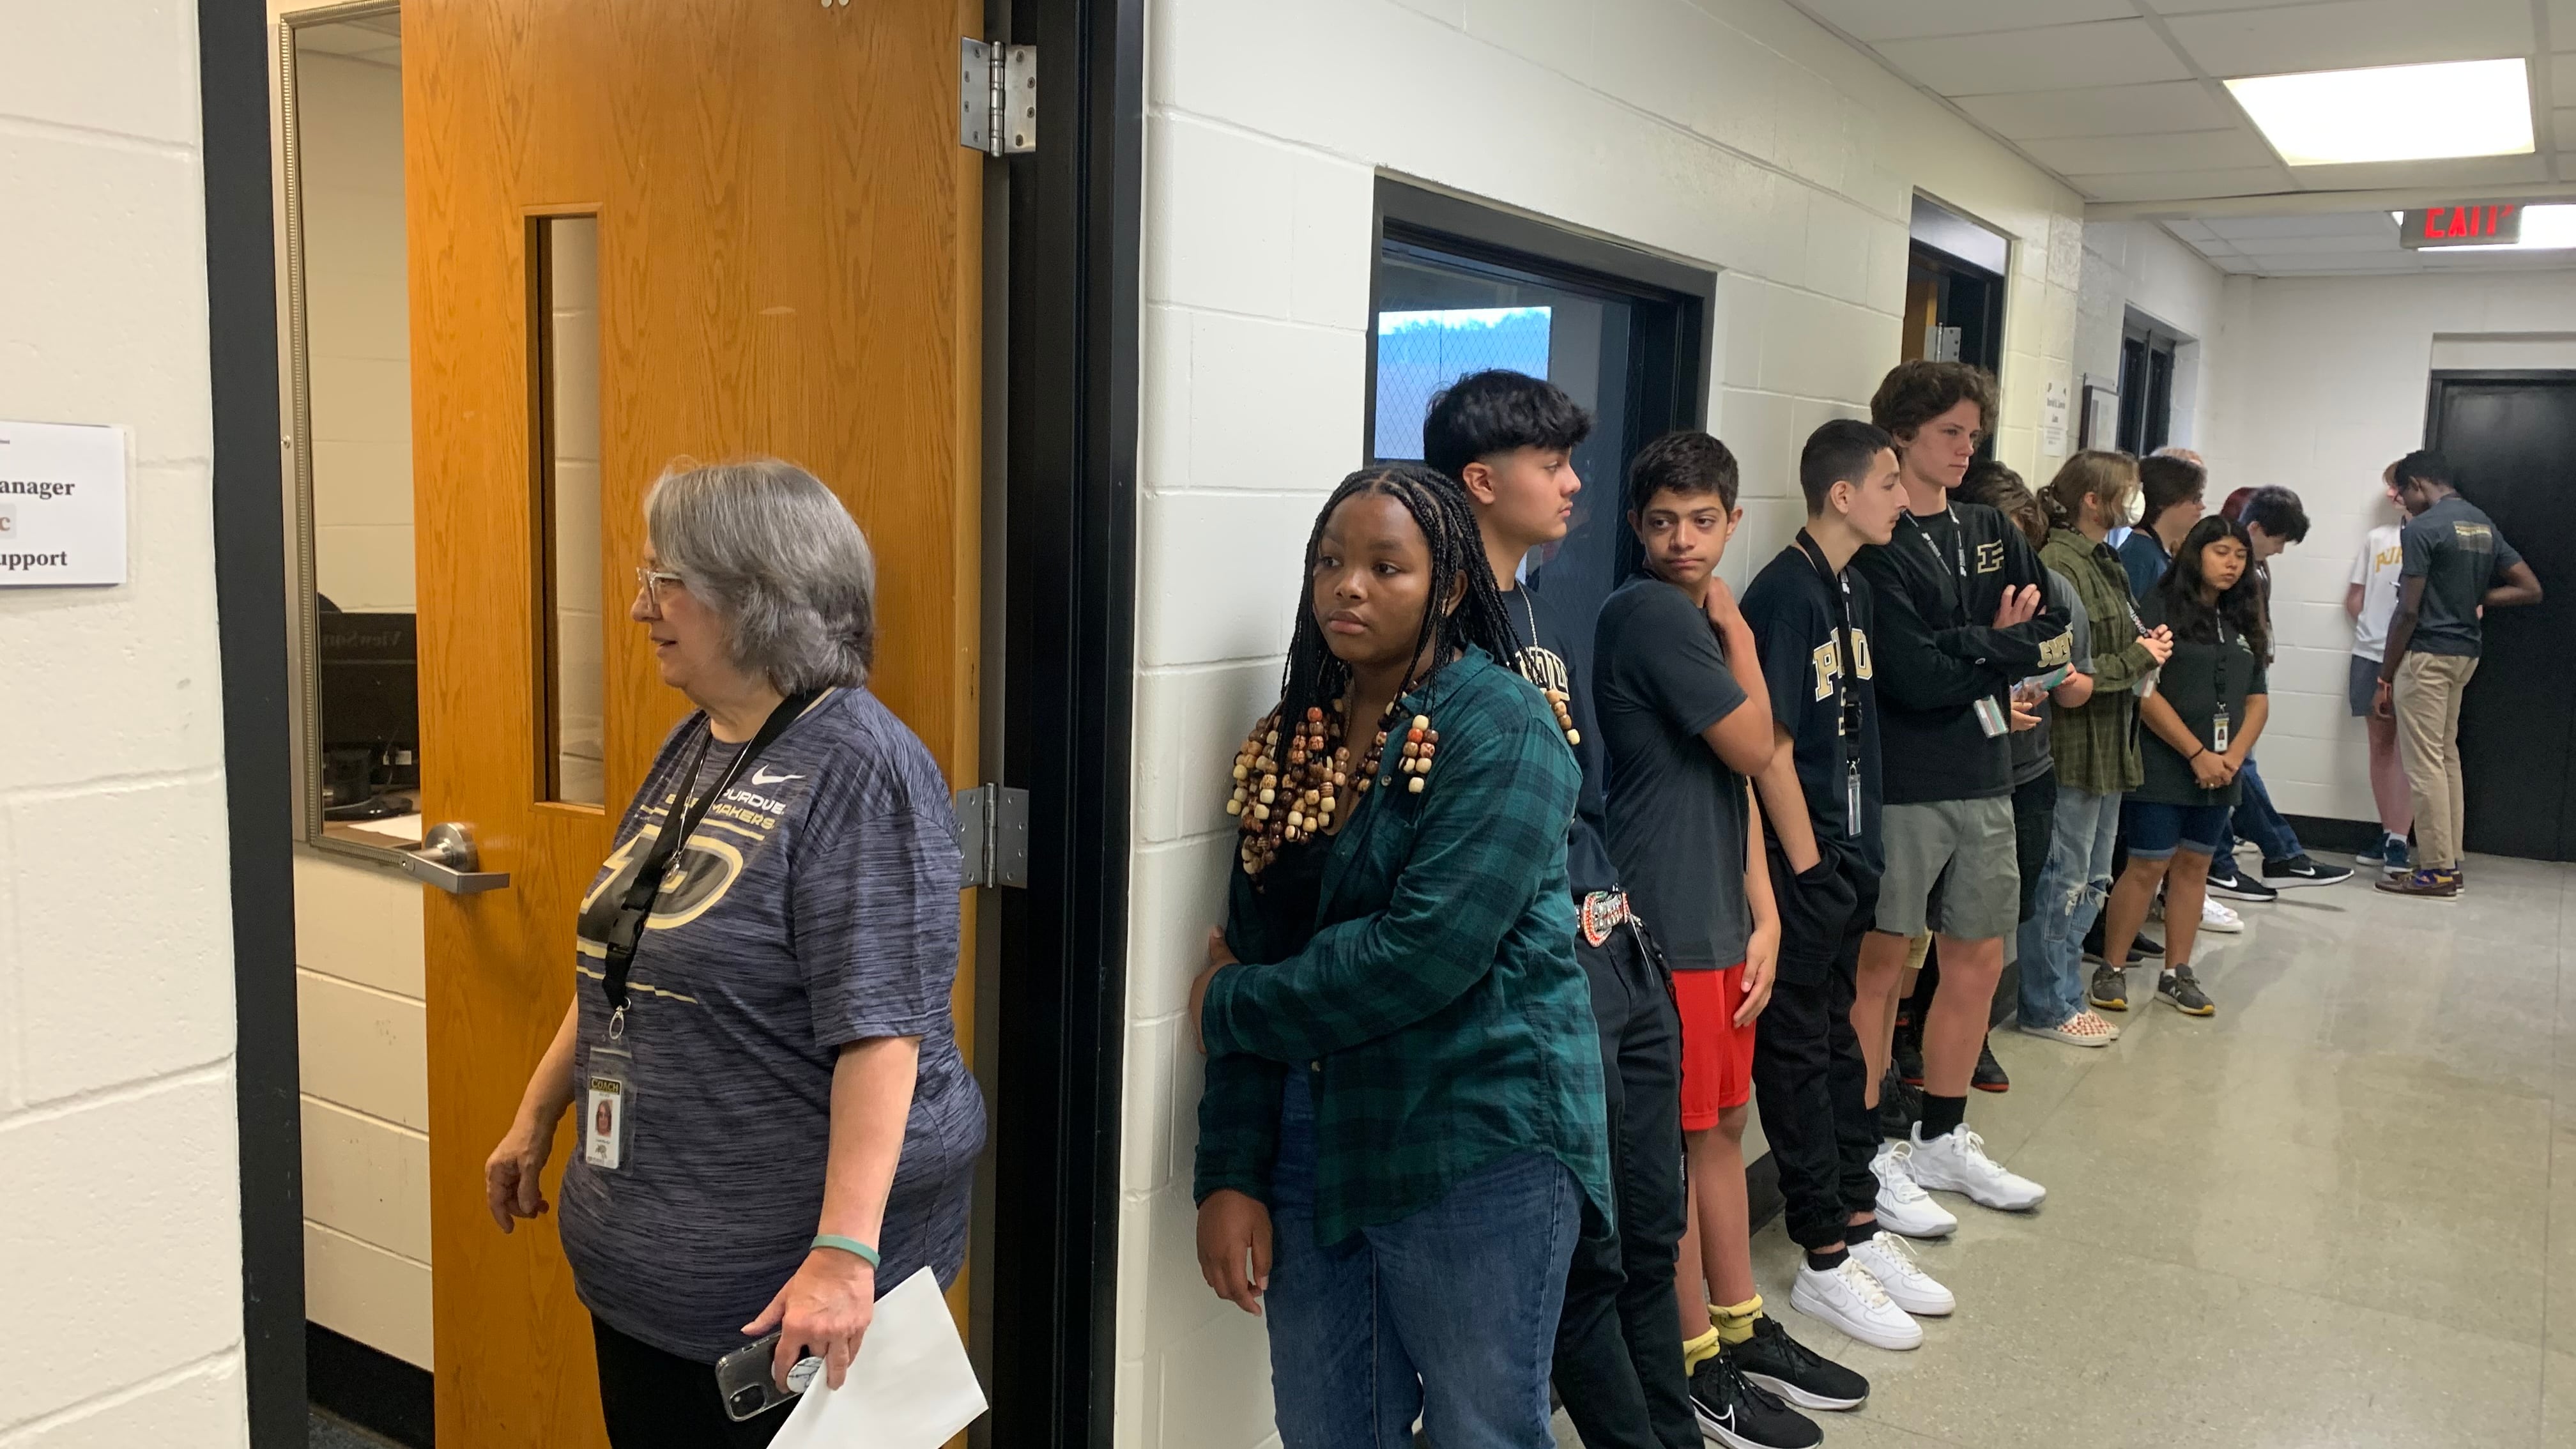 A staff member stands in the doorway next to a long line of high school students.